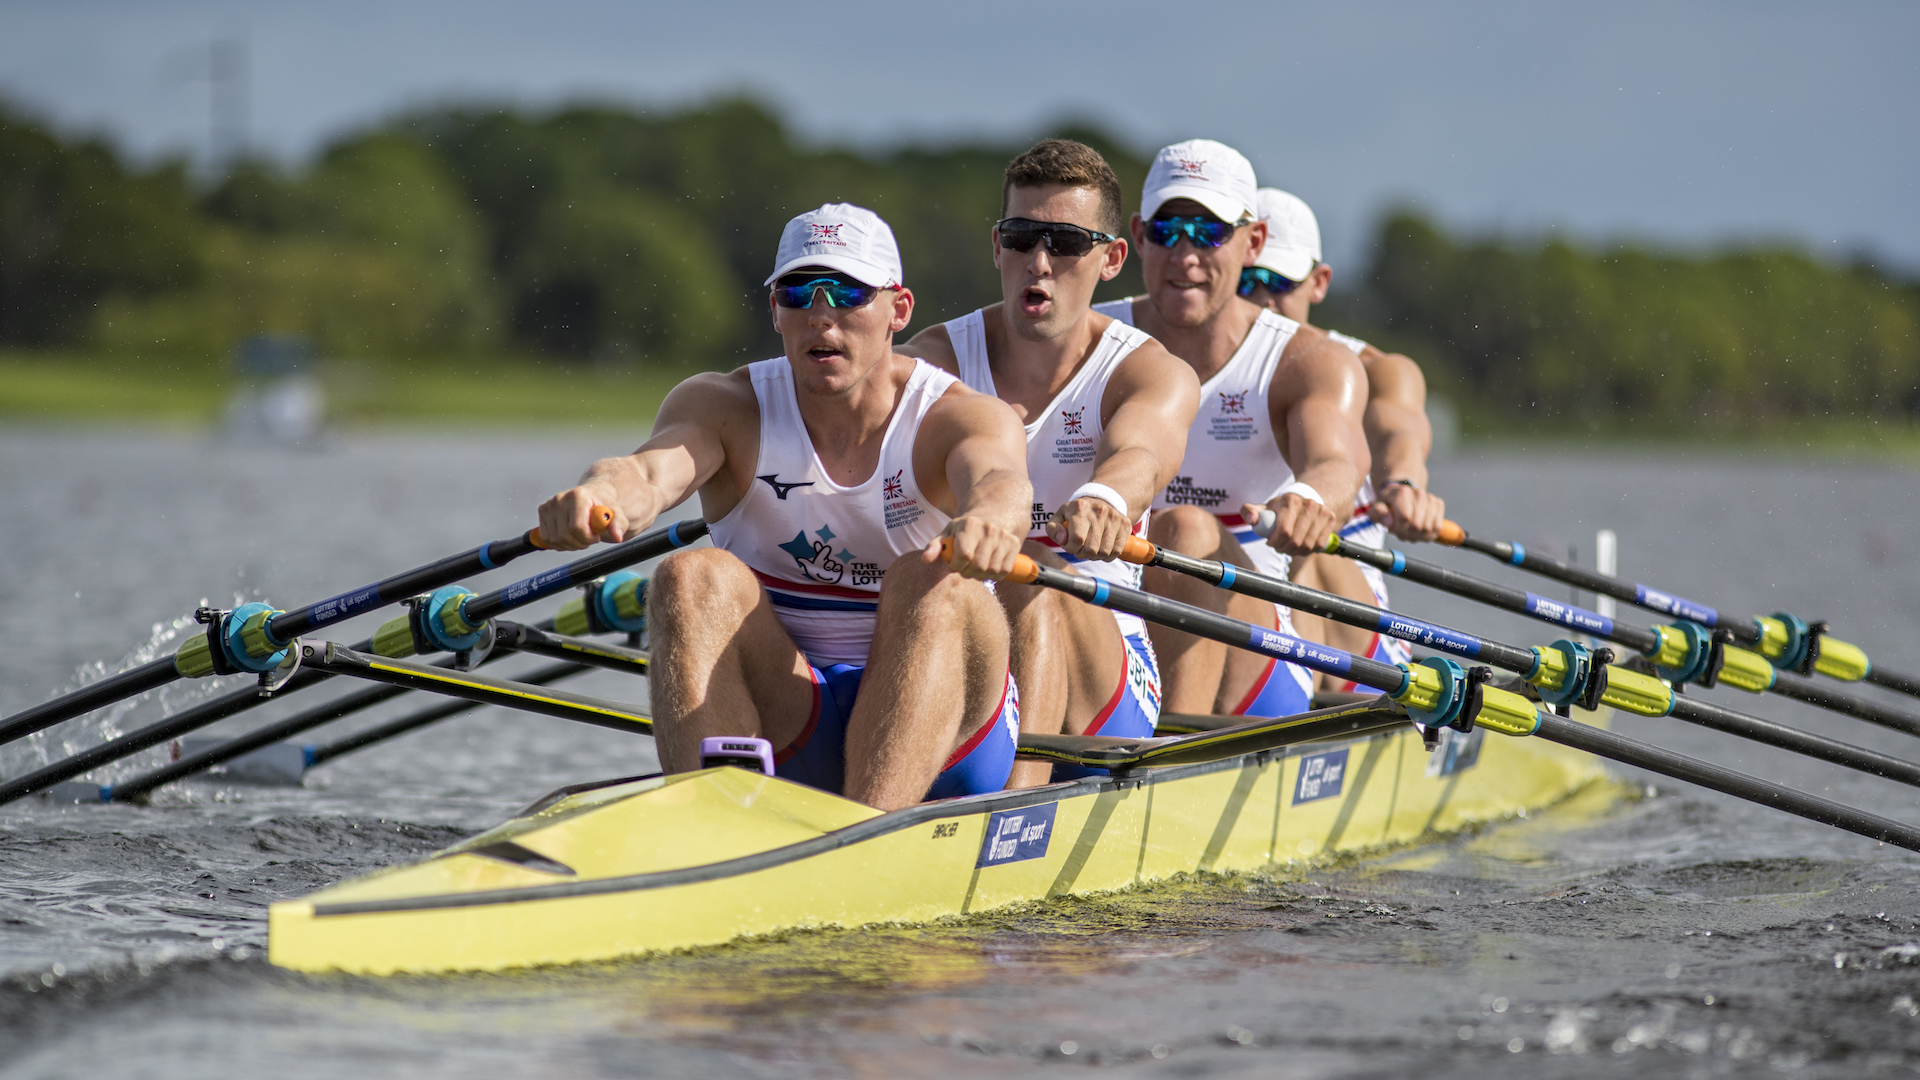 Strong performance from Great Britain Rowing Team on third day of U23